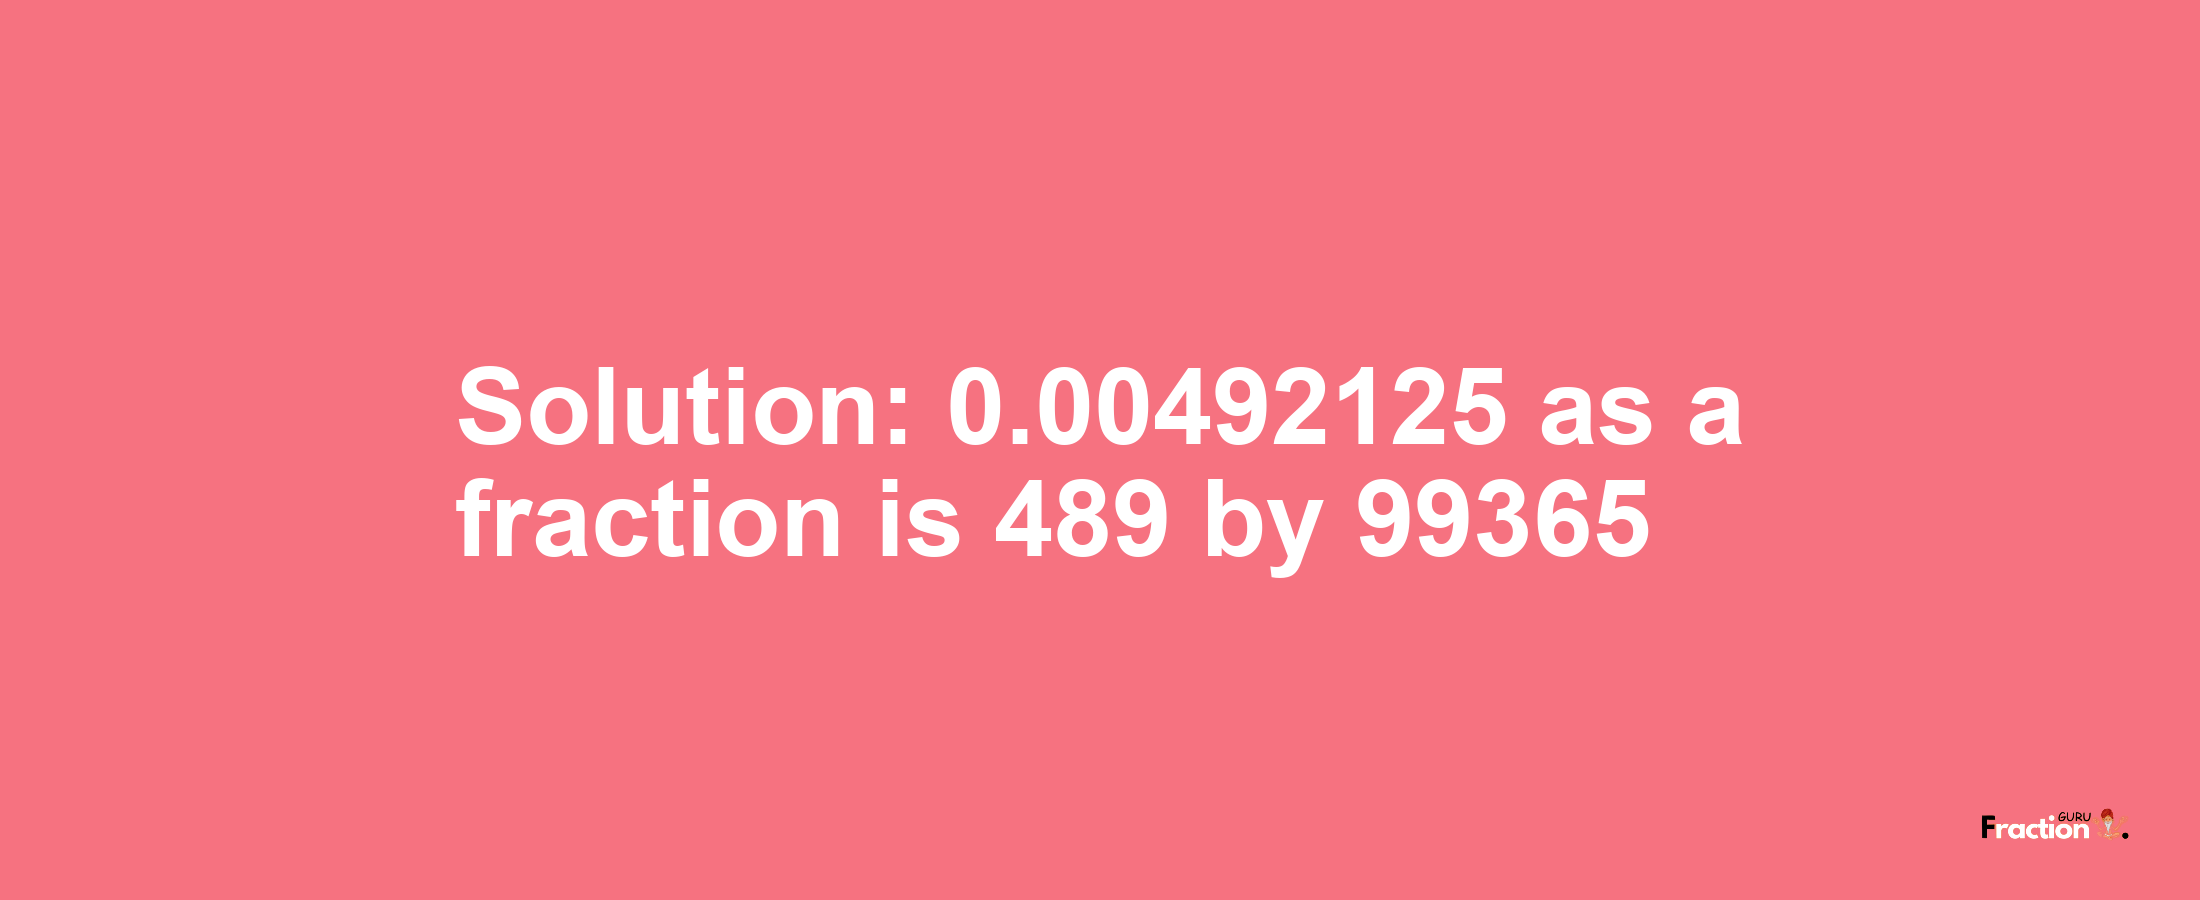 Solution:0.00492125 as a fraction is 489/99365